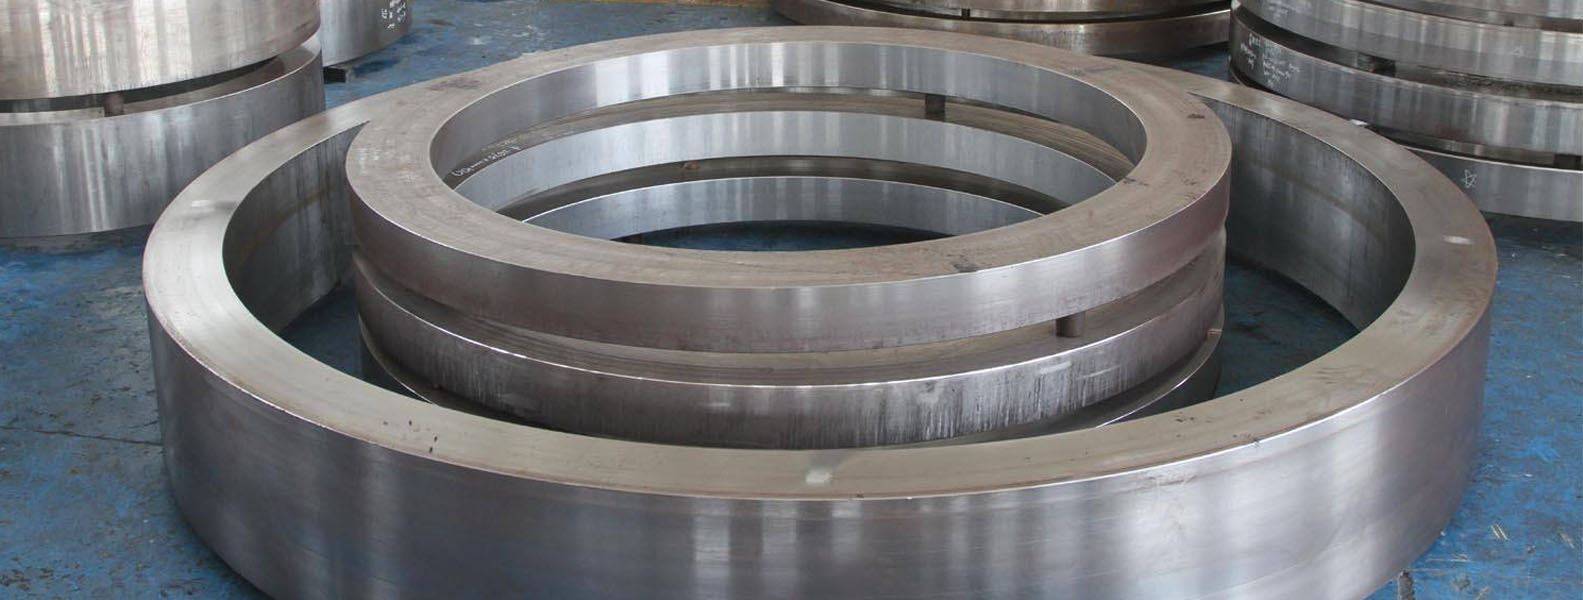 Flanges | Stainless Steel Flanges | Pipe Fittings | Manufacturer by Nova  steel corporation - Issuu